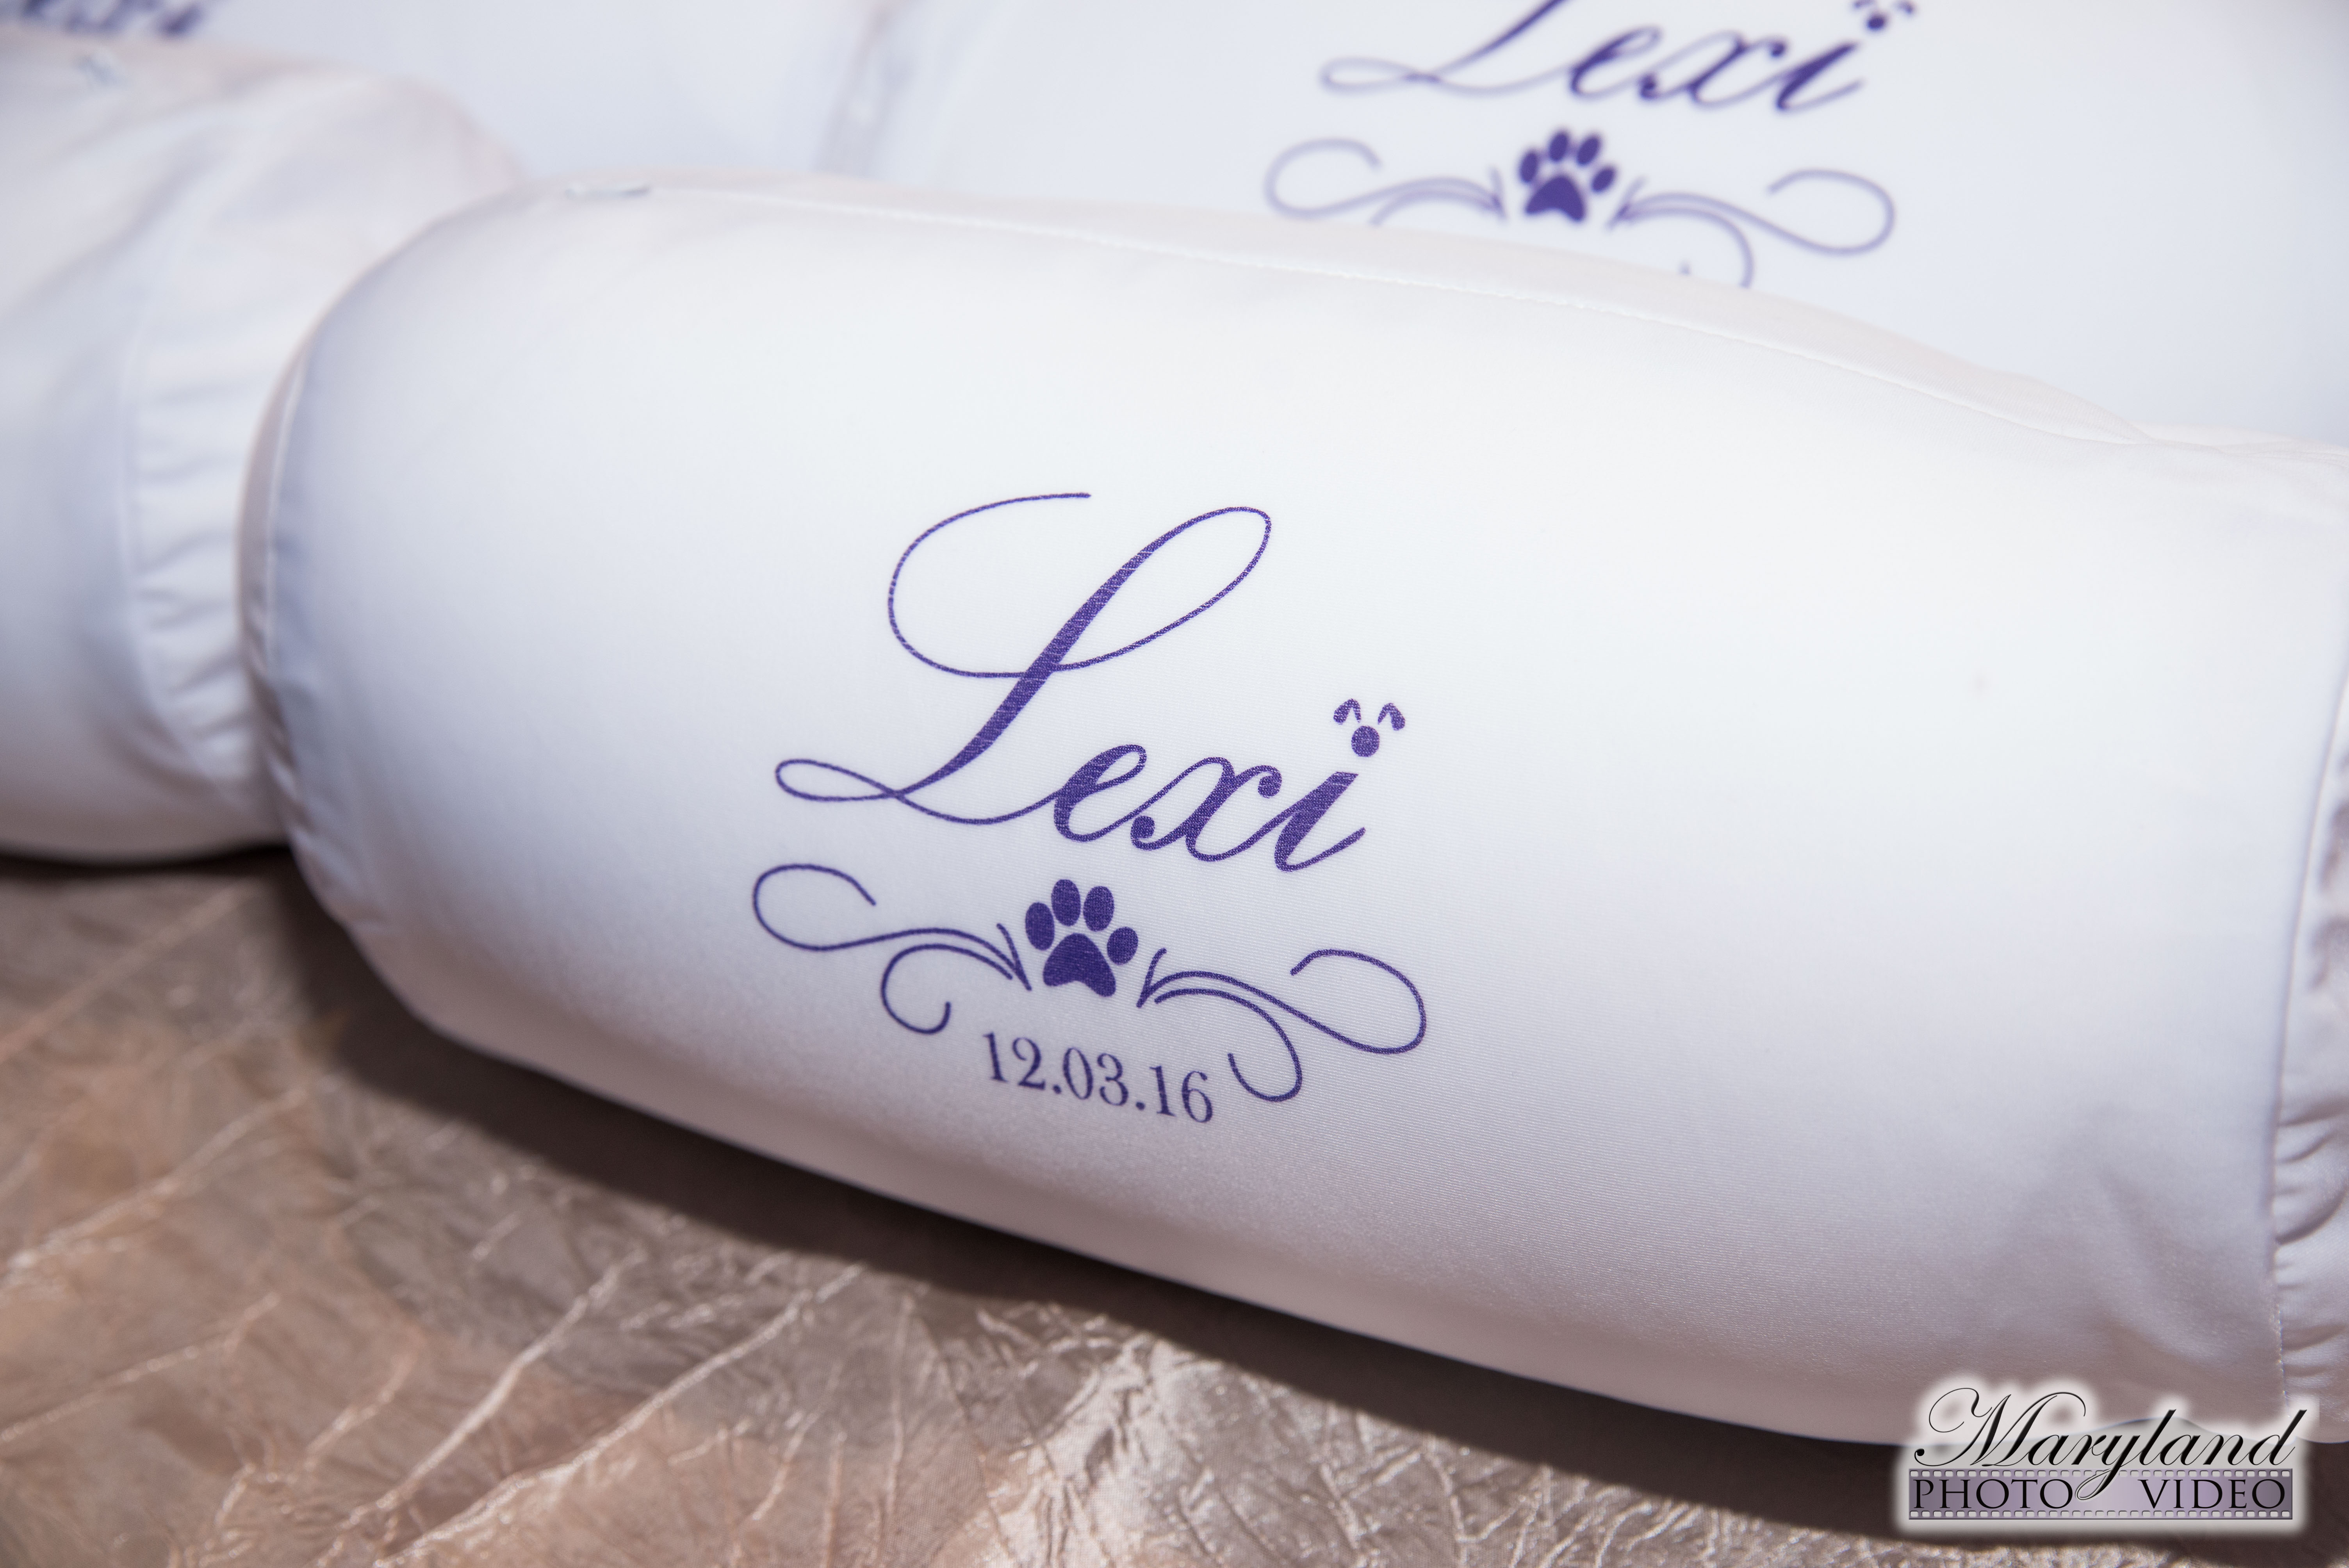 Pillow favors at purple Dog themed Bat Mitzvah Party at Westin Tysons Corner | Pop Color Events | Adding a Pop of Color to Bar & Bat Mitzvahs in DC, MD & VA | Photo by Maryland Photo/Video